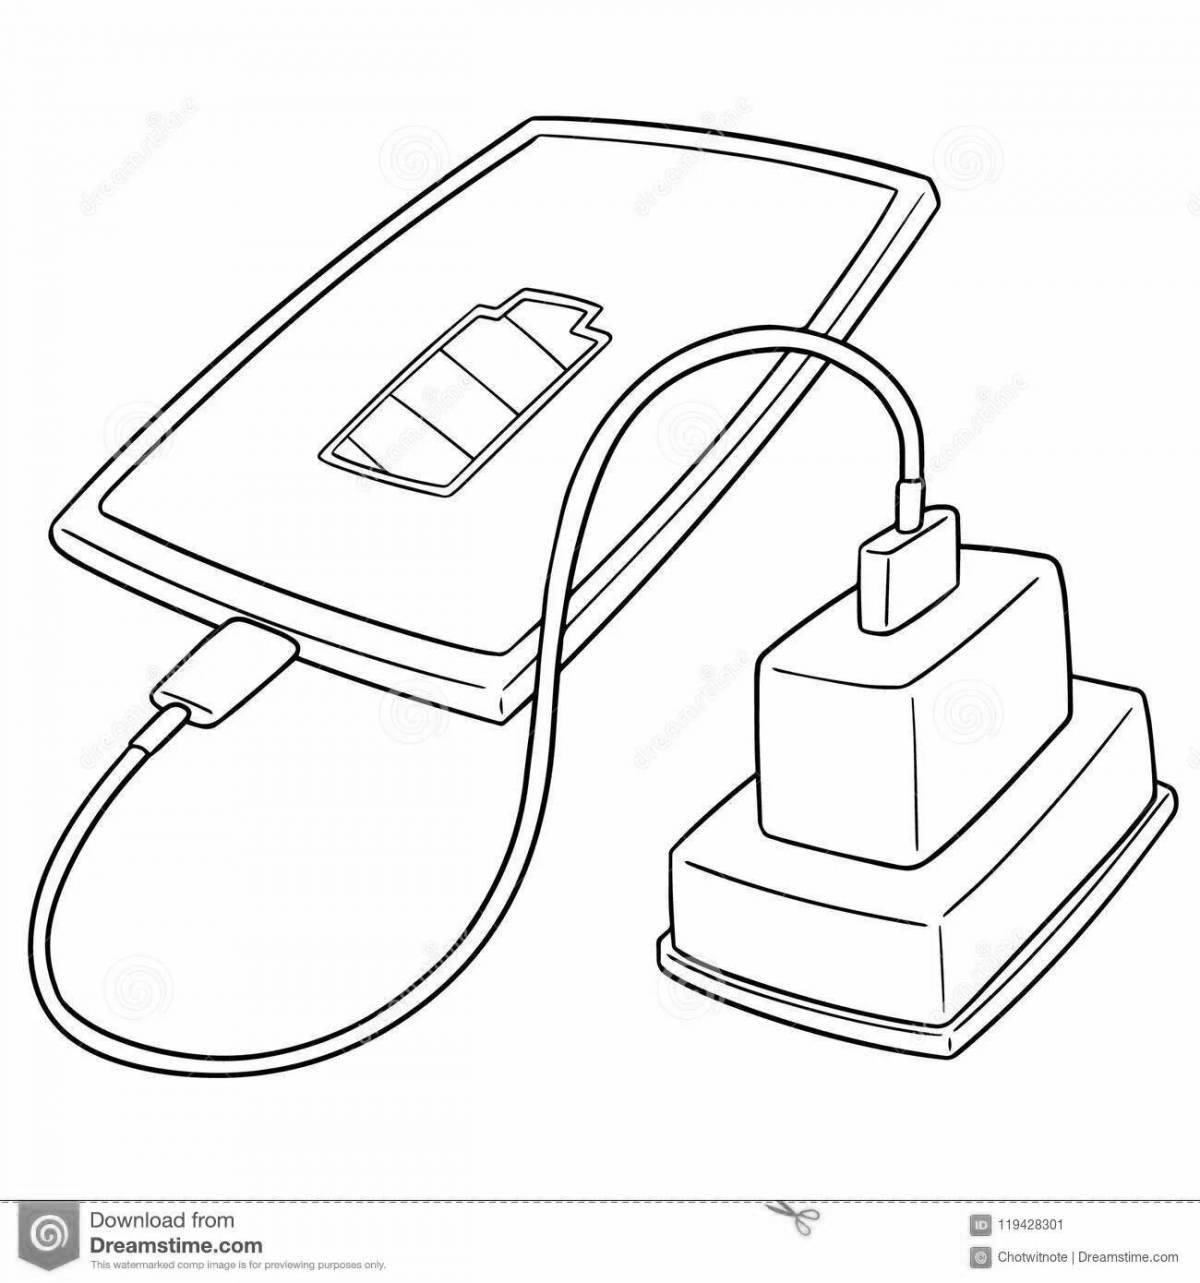 Fun coloring page of phone charger